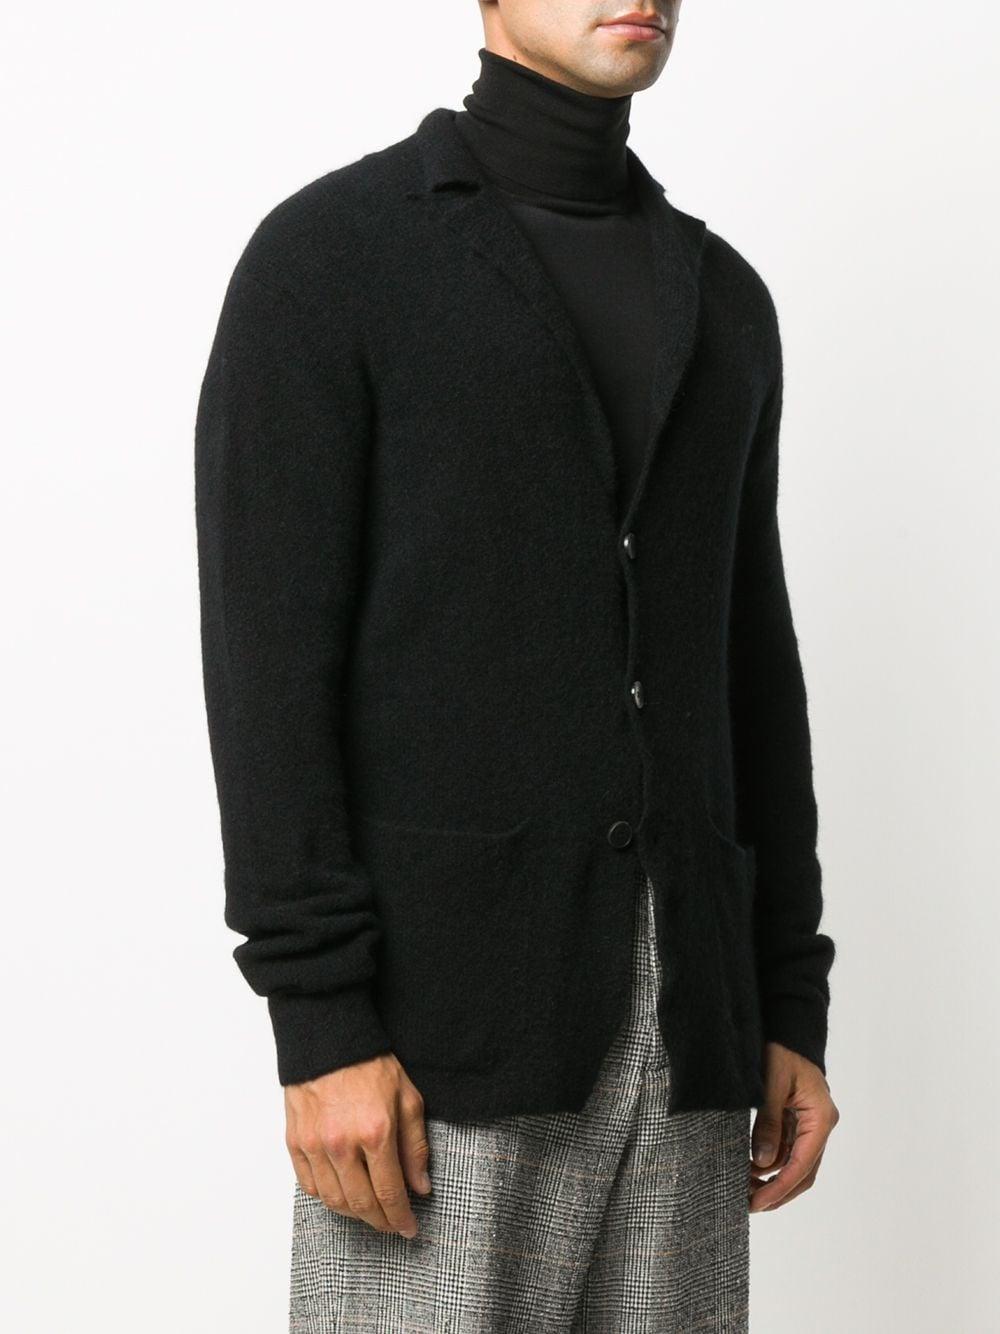 Roberto Collina Notched Lapel Cardigan in Black for Men - Lyst